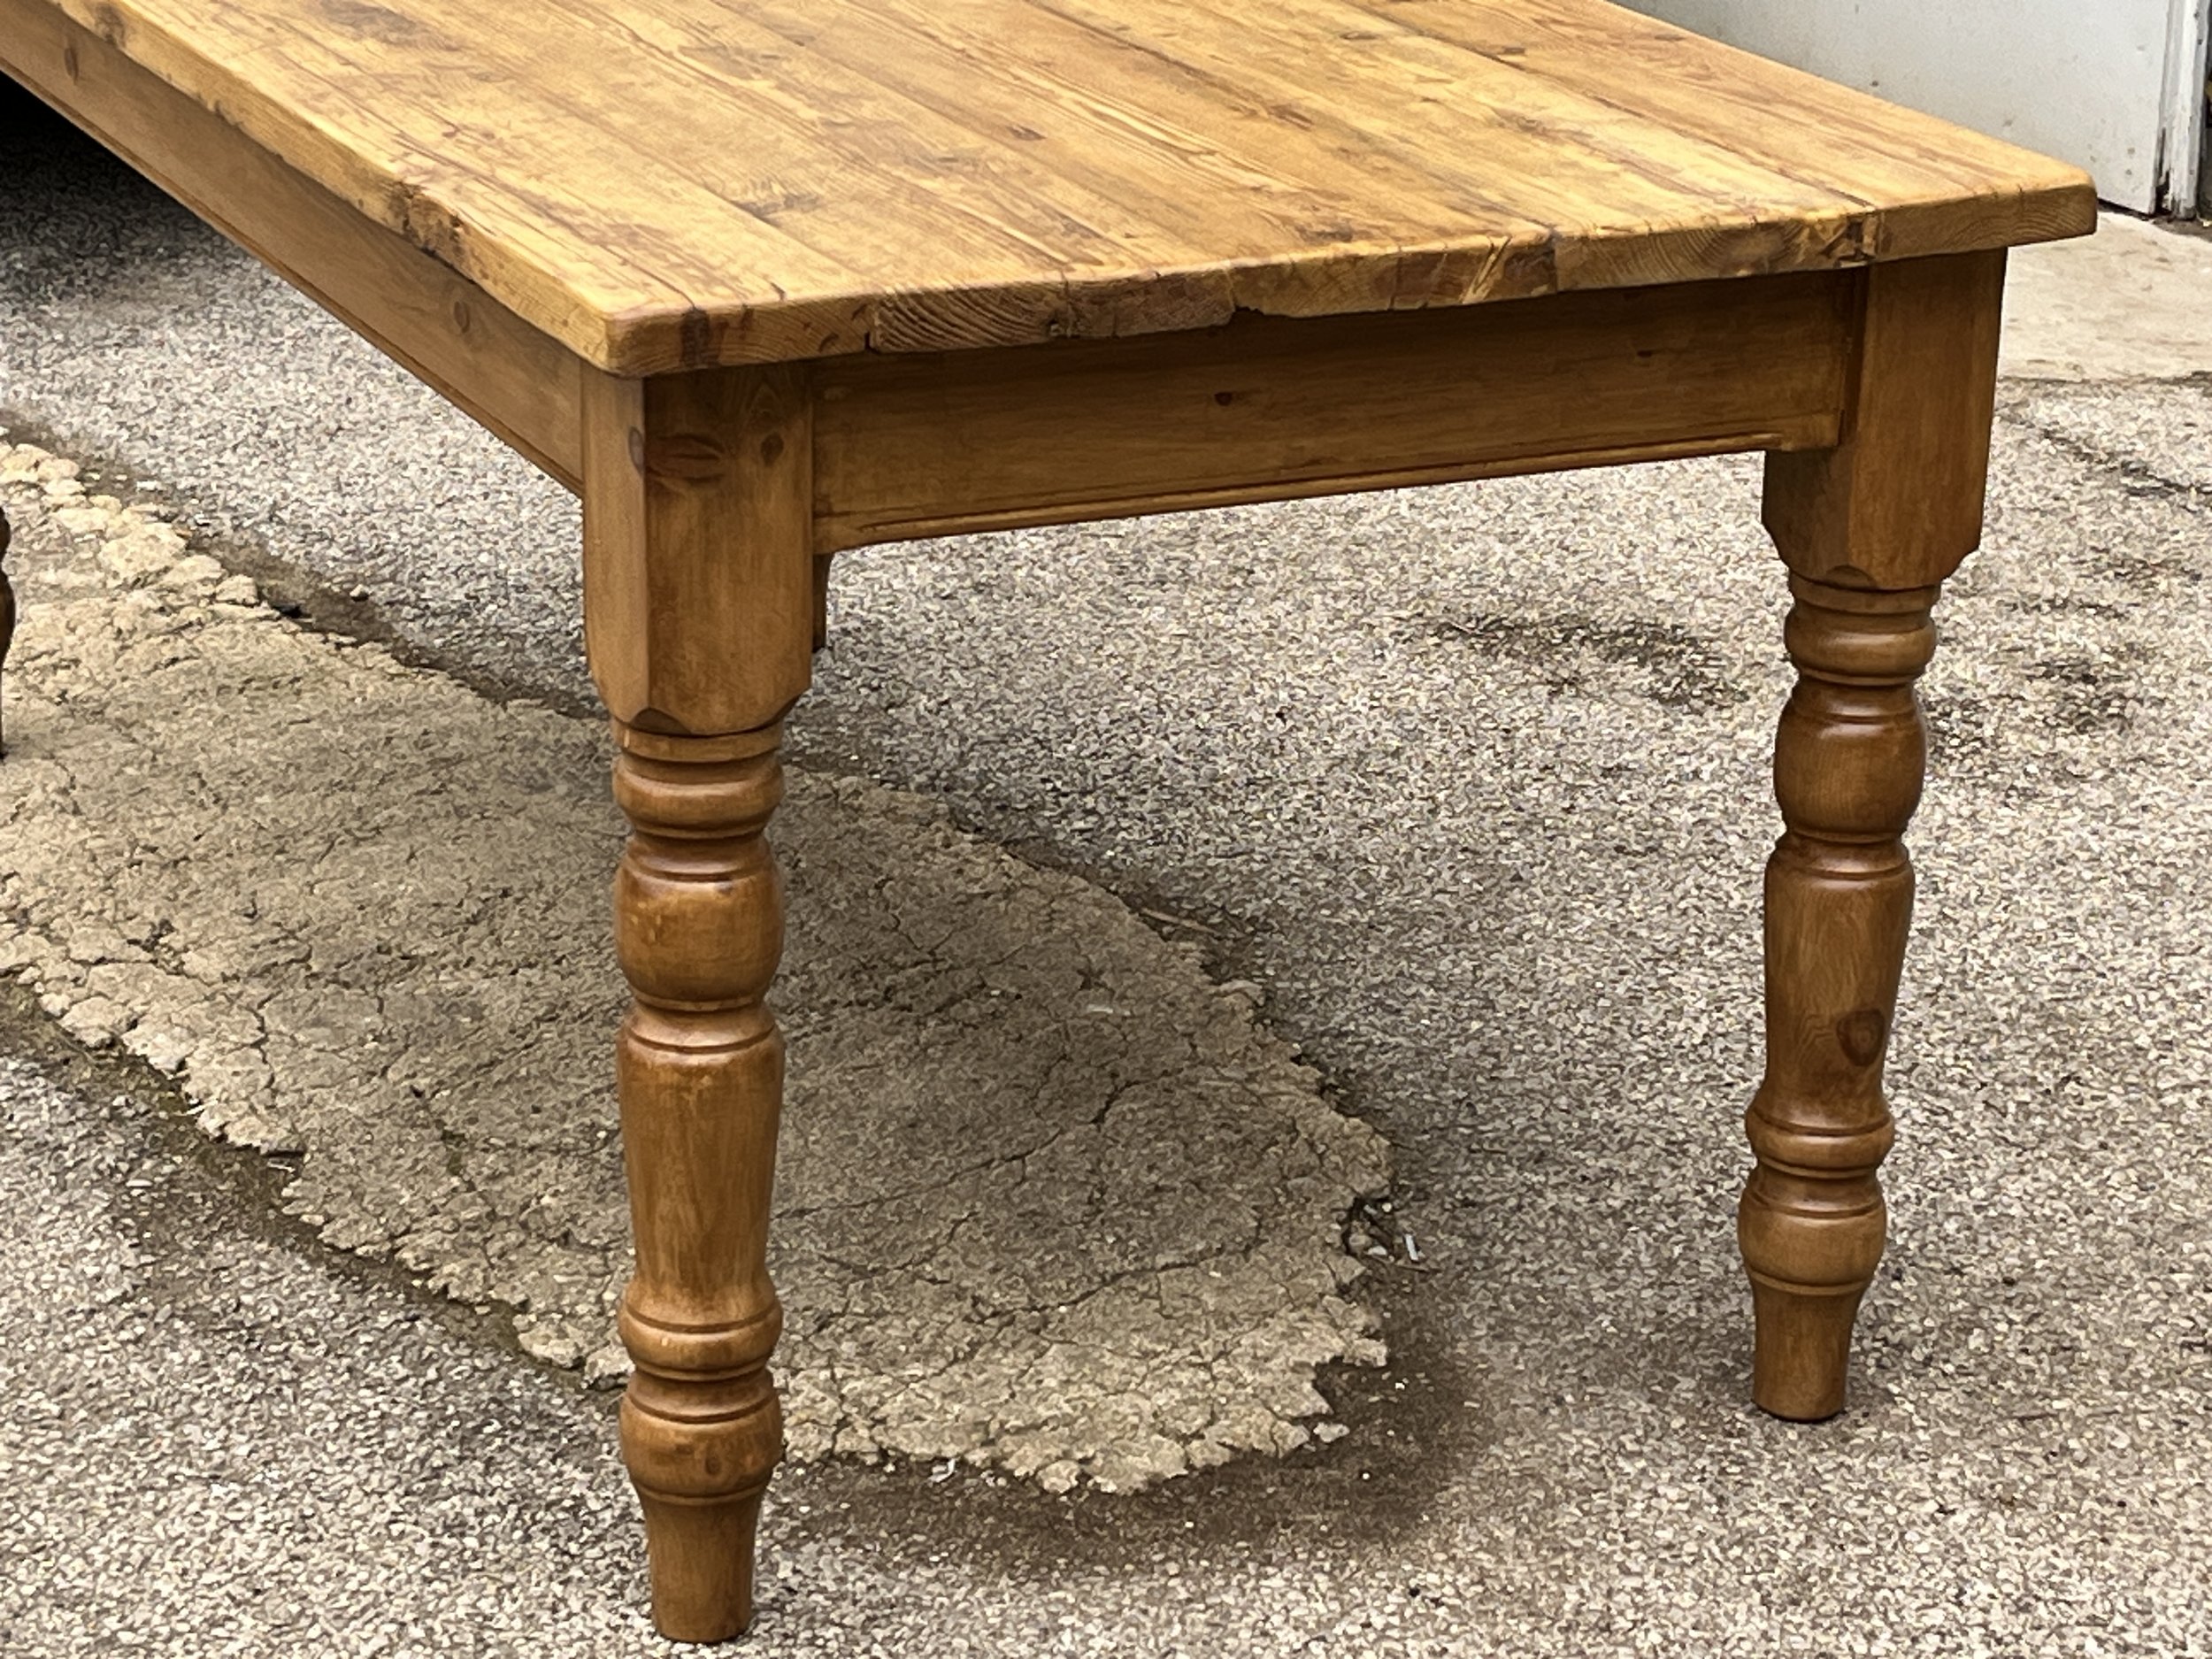 Pine table with turned legs